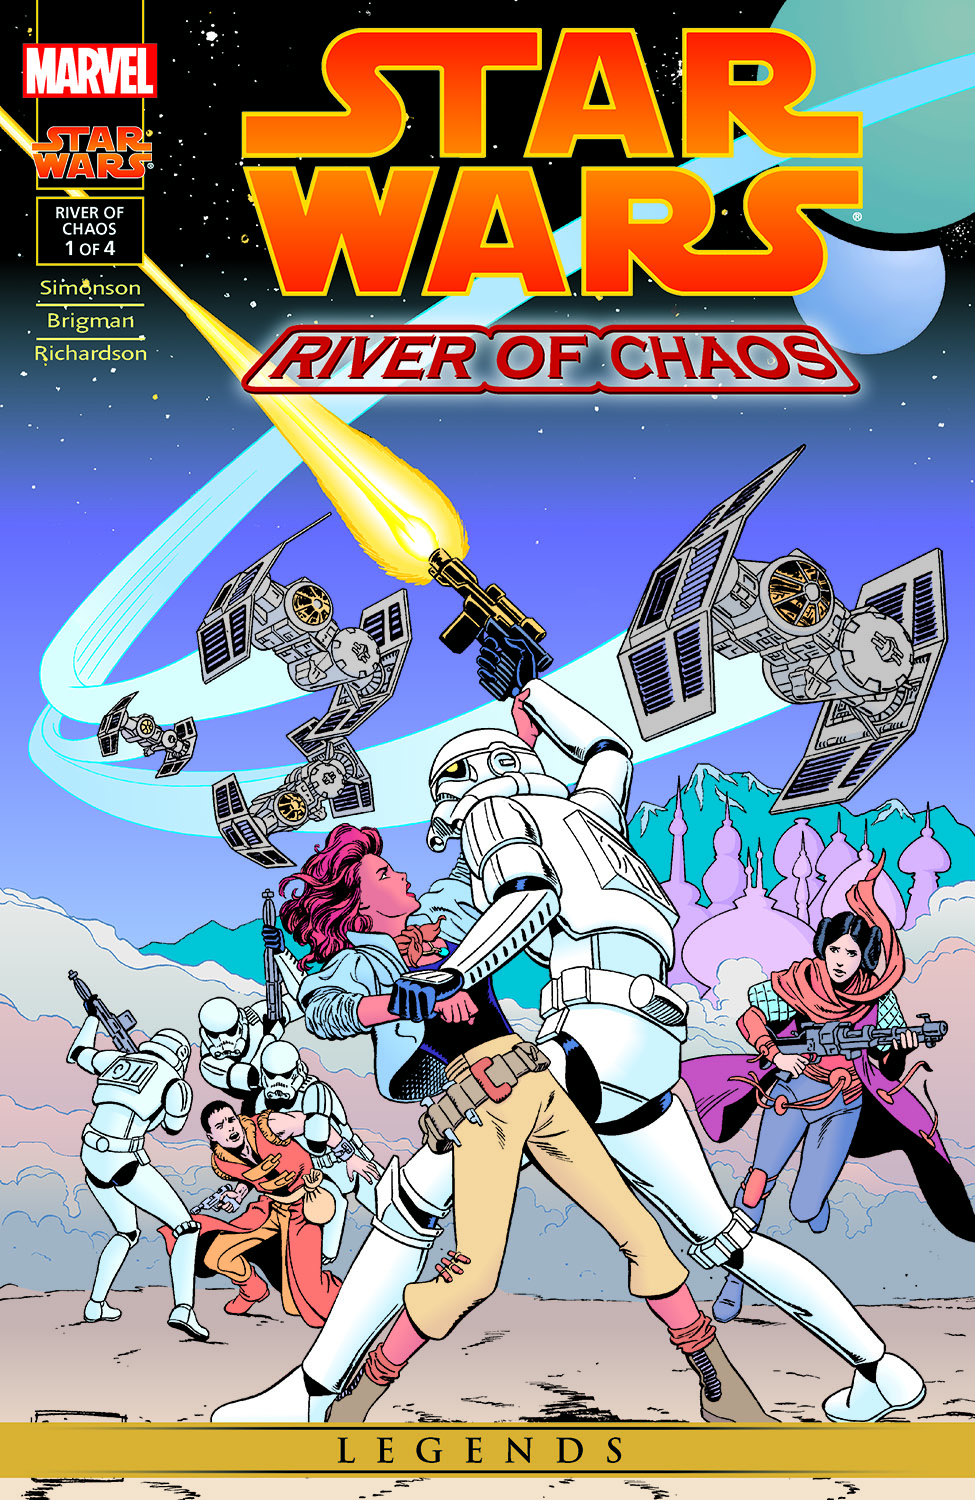 Star Wars: River of Chaos (1995) #1